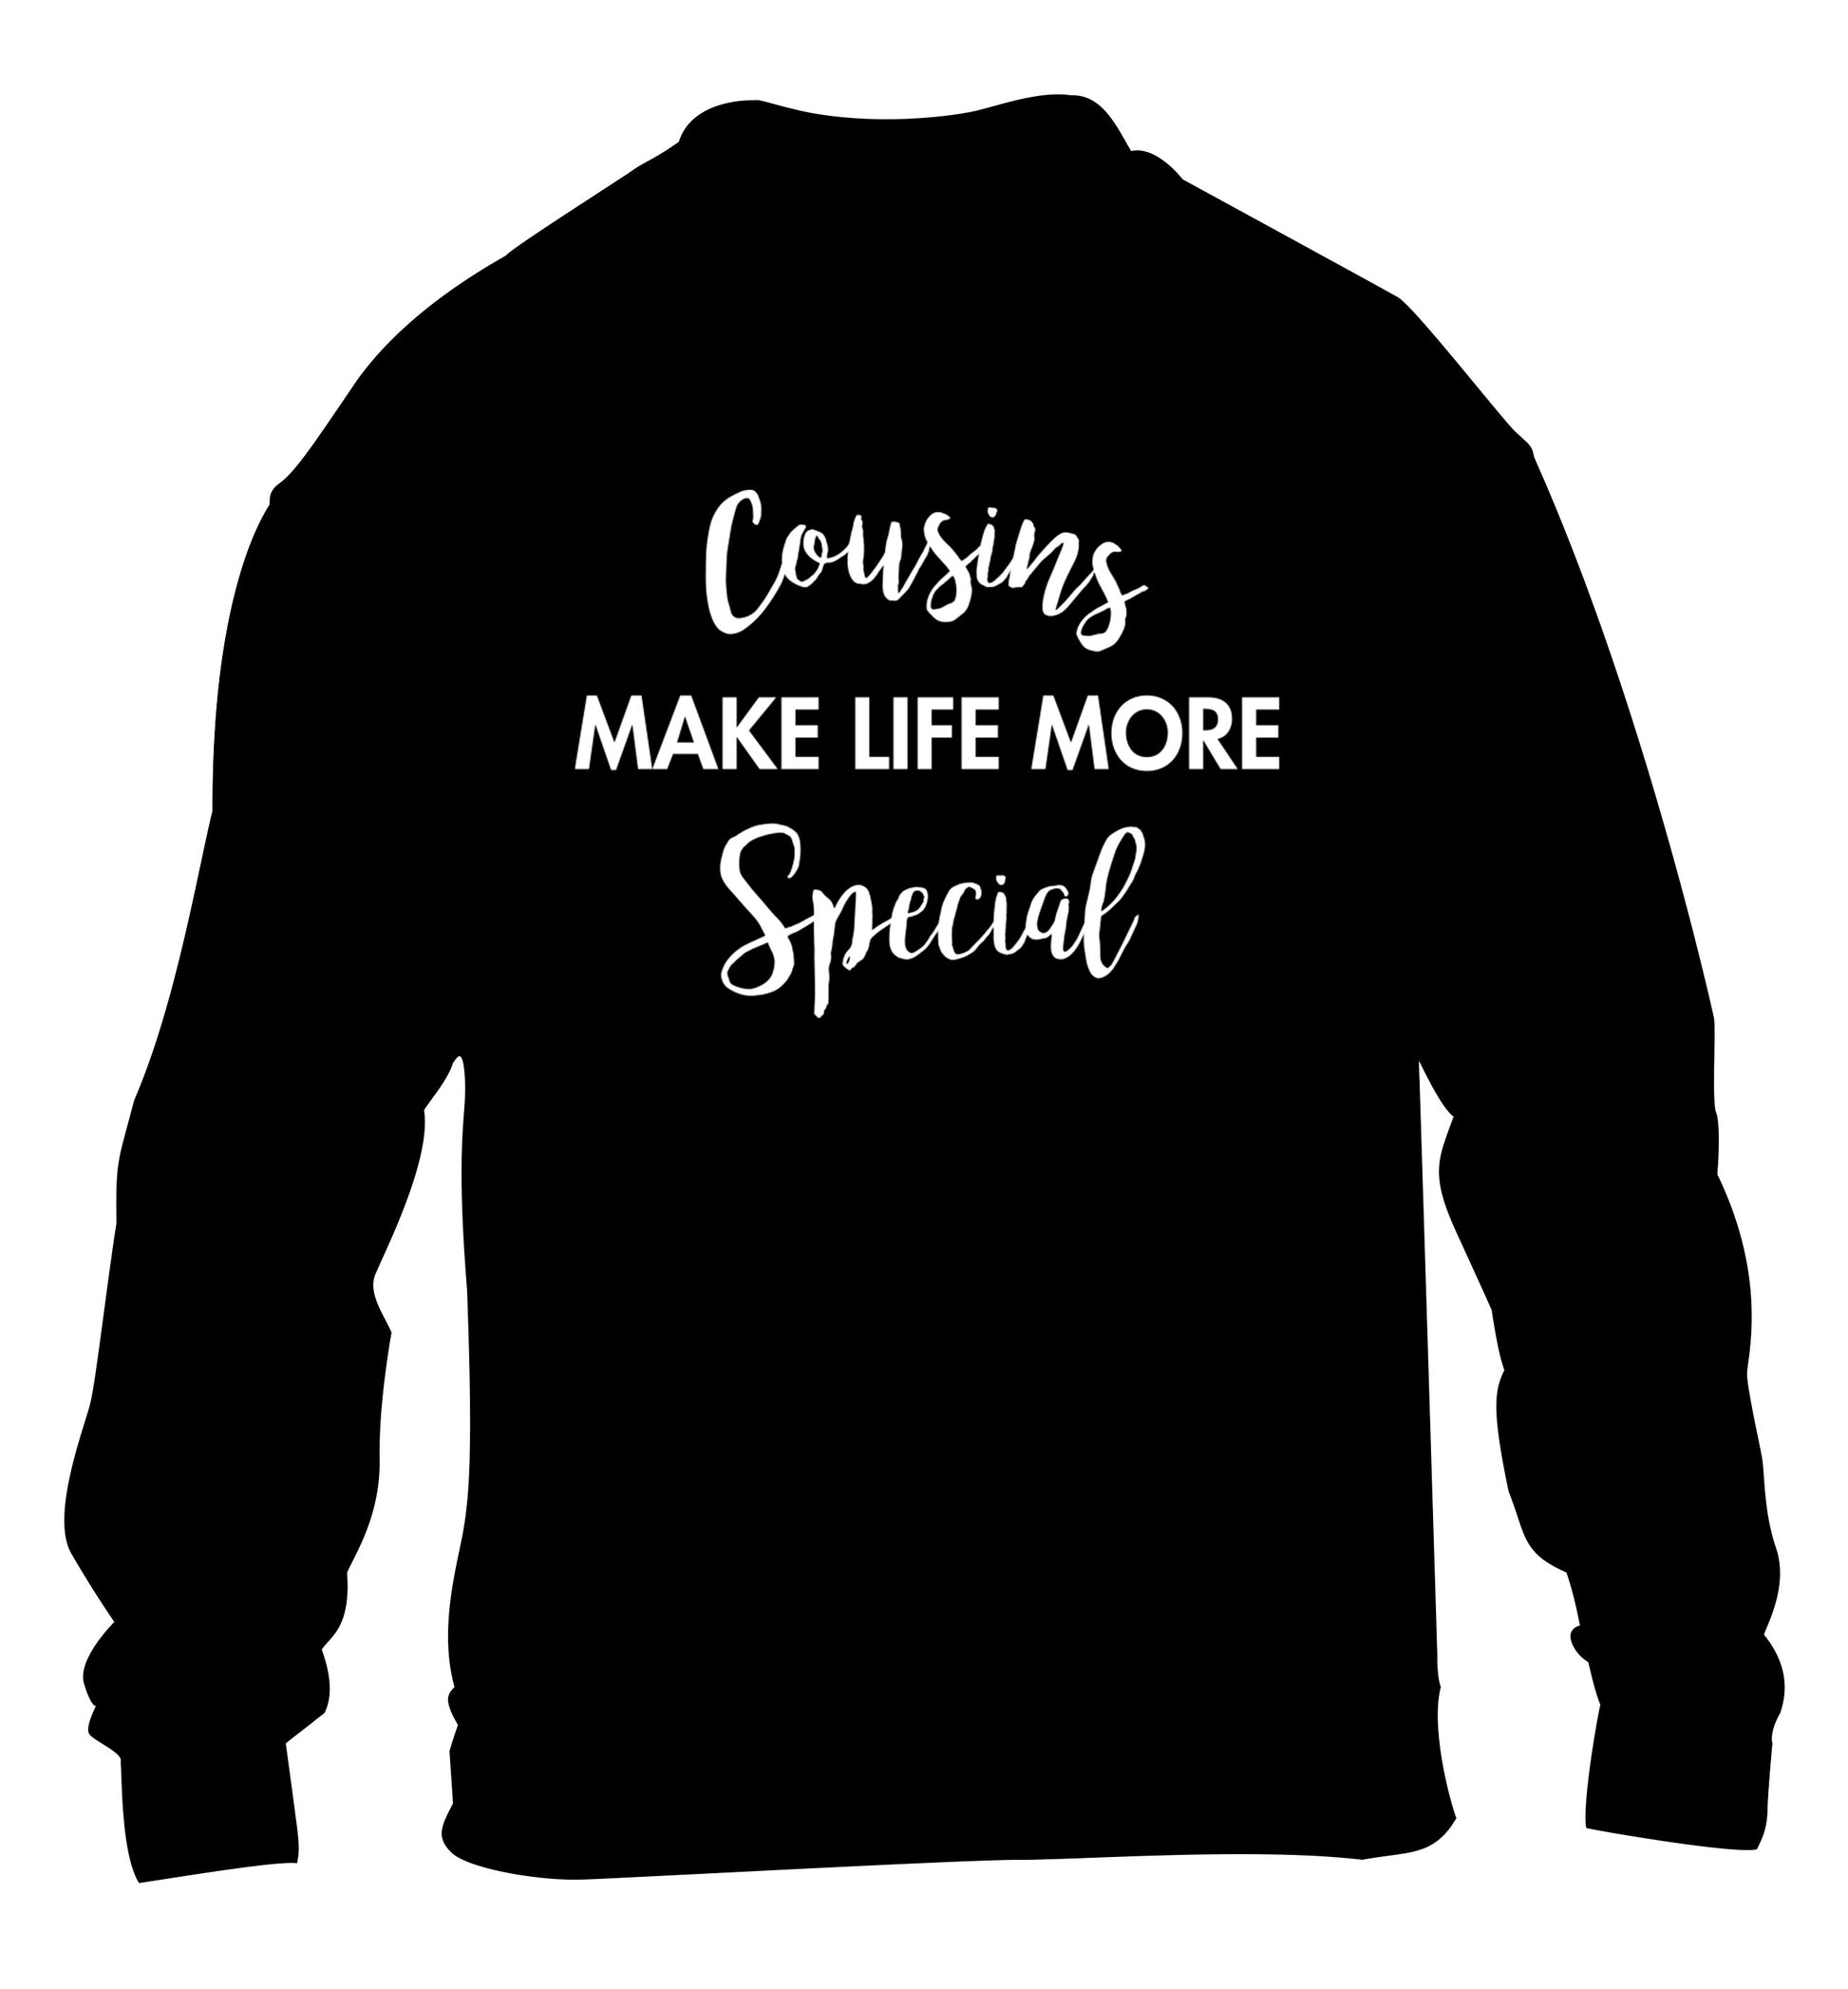 Cousins make life more special children's black sweater 12-14 Years